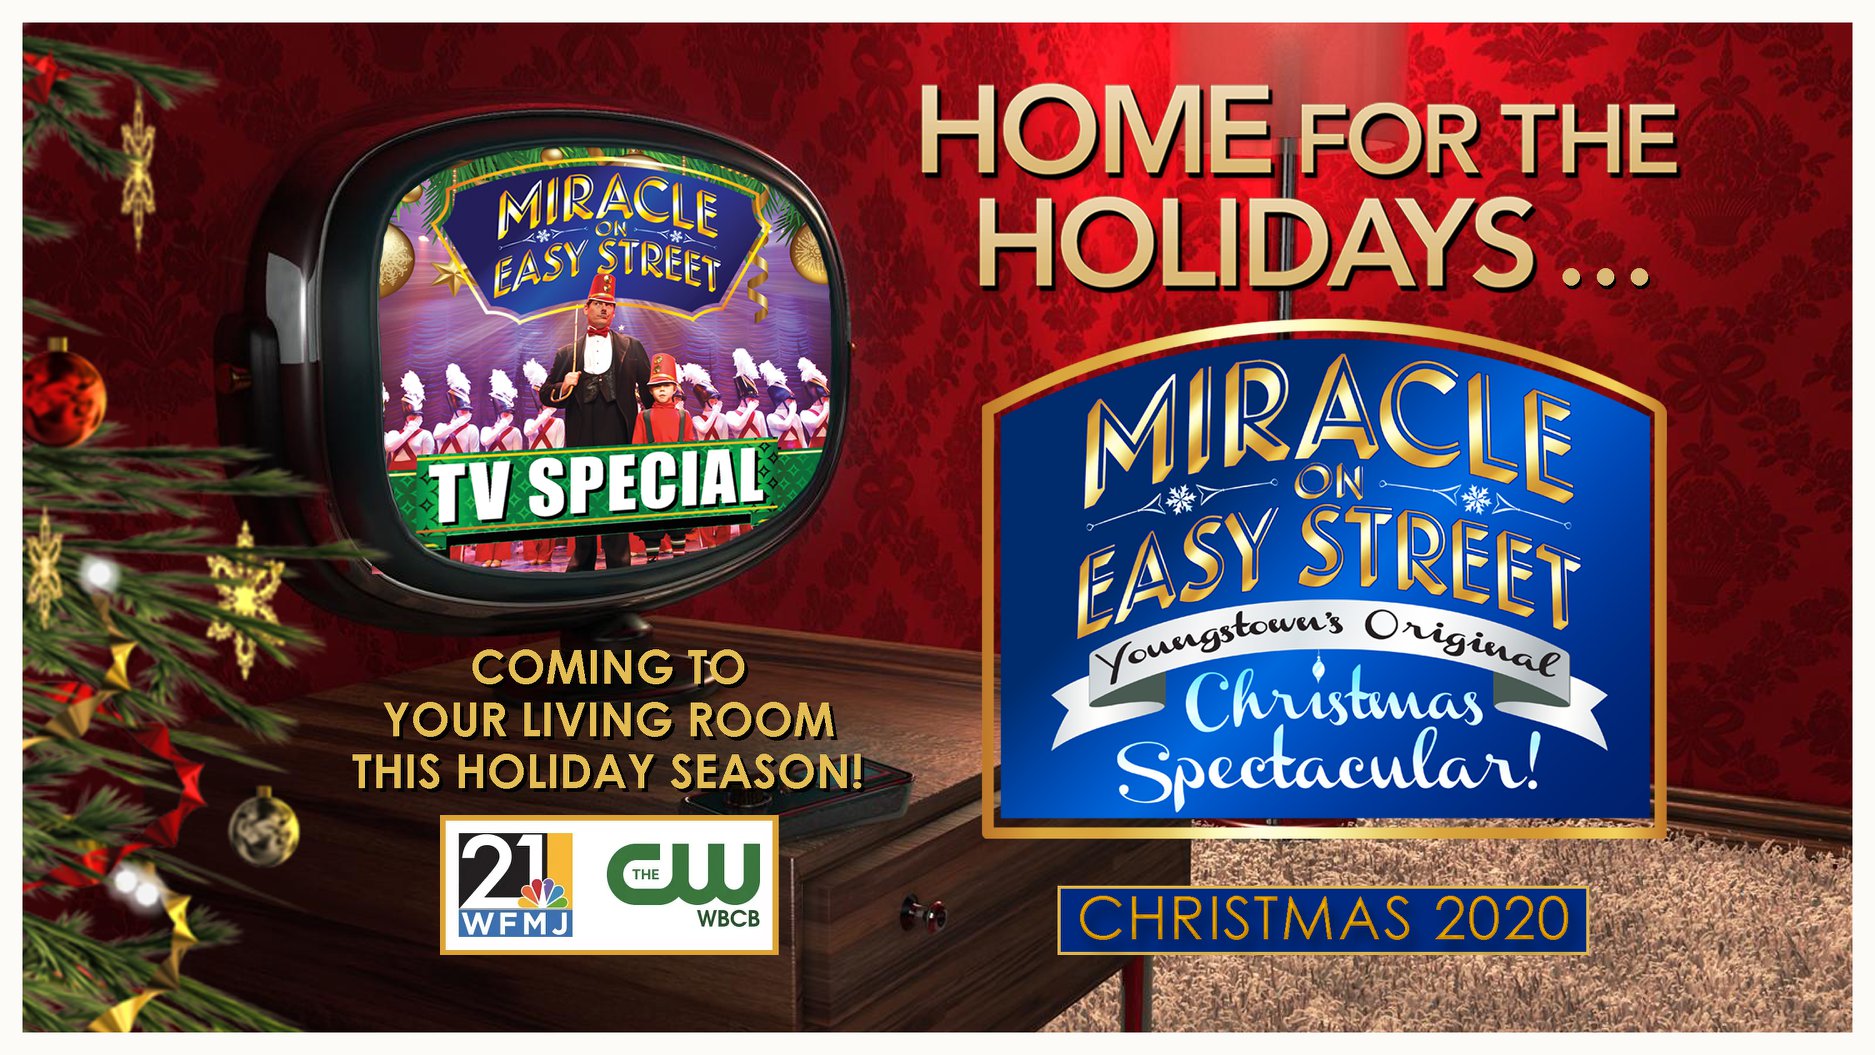 Miracle on Easy Street to be broadcast on WFMJ this holiday season